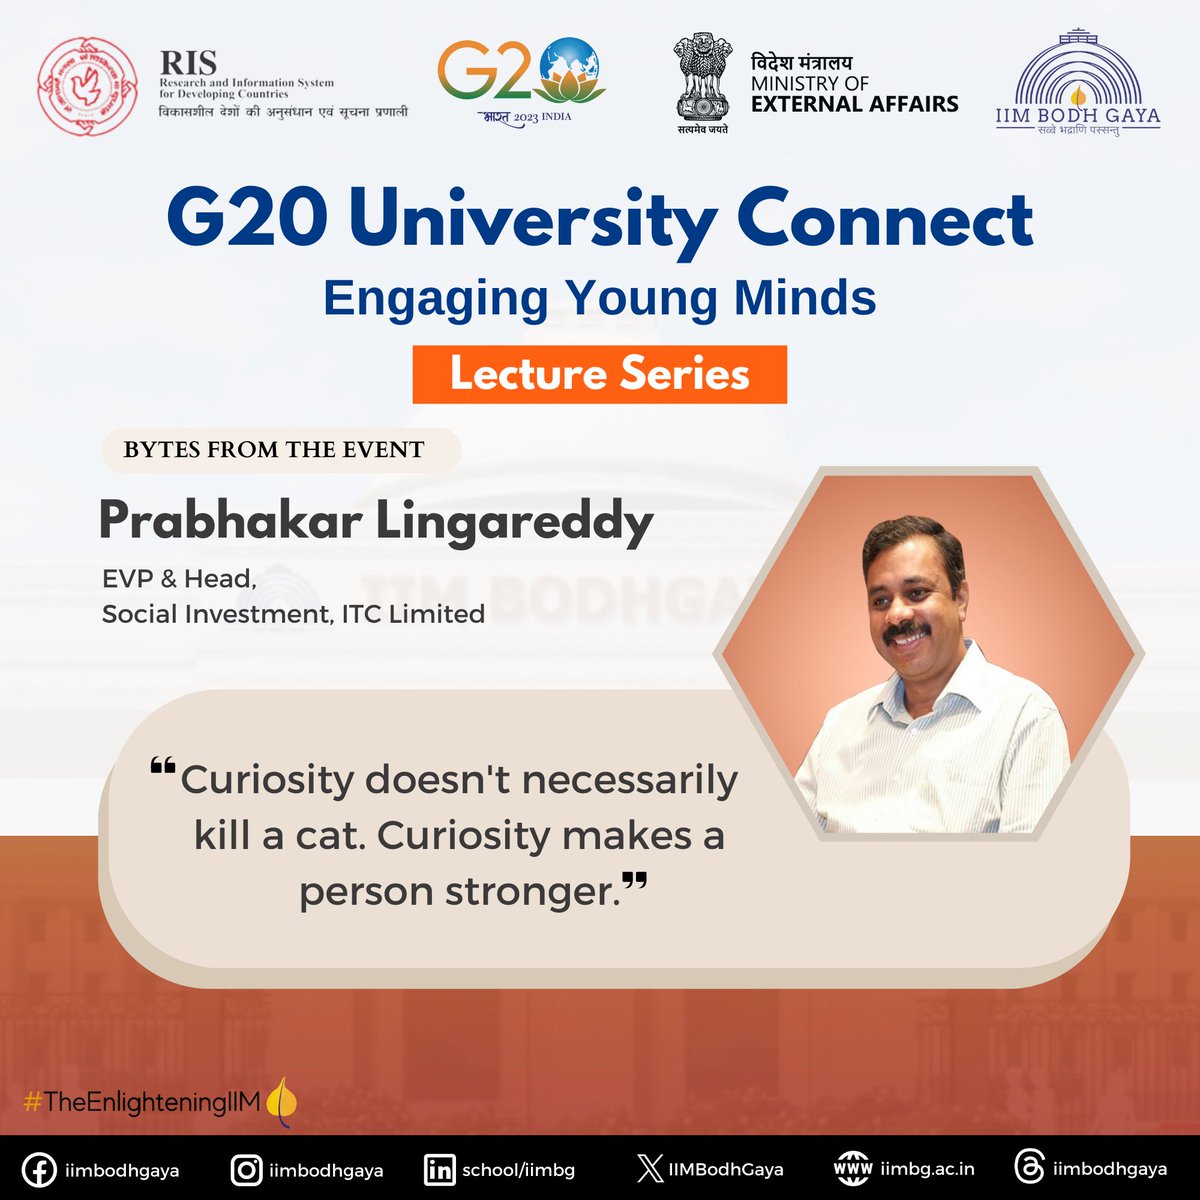 Mr. Prabhakar Lingareddy, EVP and Head Social Investment, ITC,  engaged in a candid conversation around new industry relevant skills.

#G20 #Universityconnect #moe #NarendraModi #guestlecture #innovation #G20India2023 #G20India #G20Summit #iimbodhgaya #ipm #emergingcareers #mba